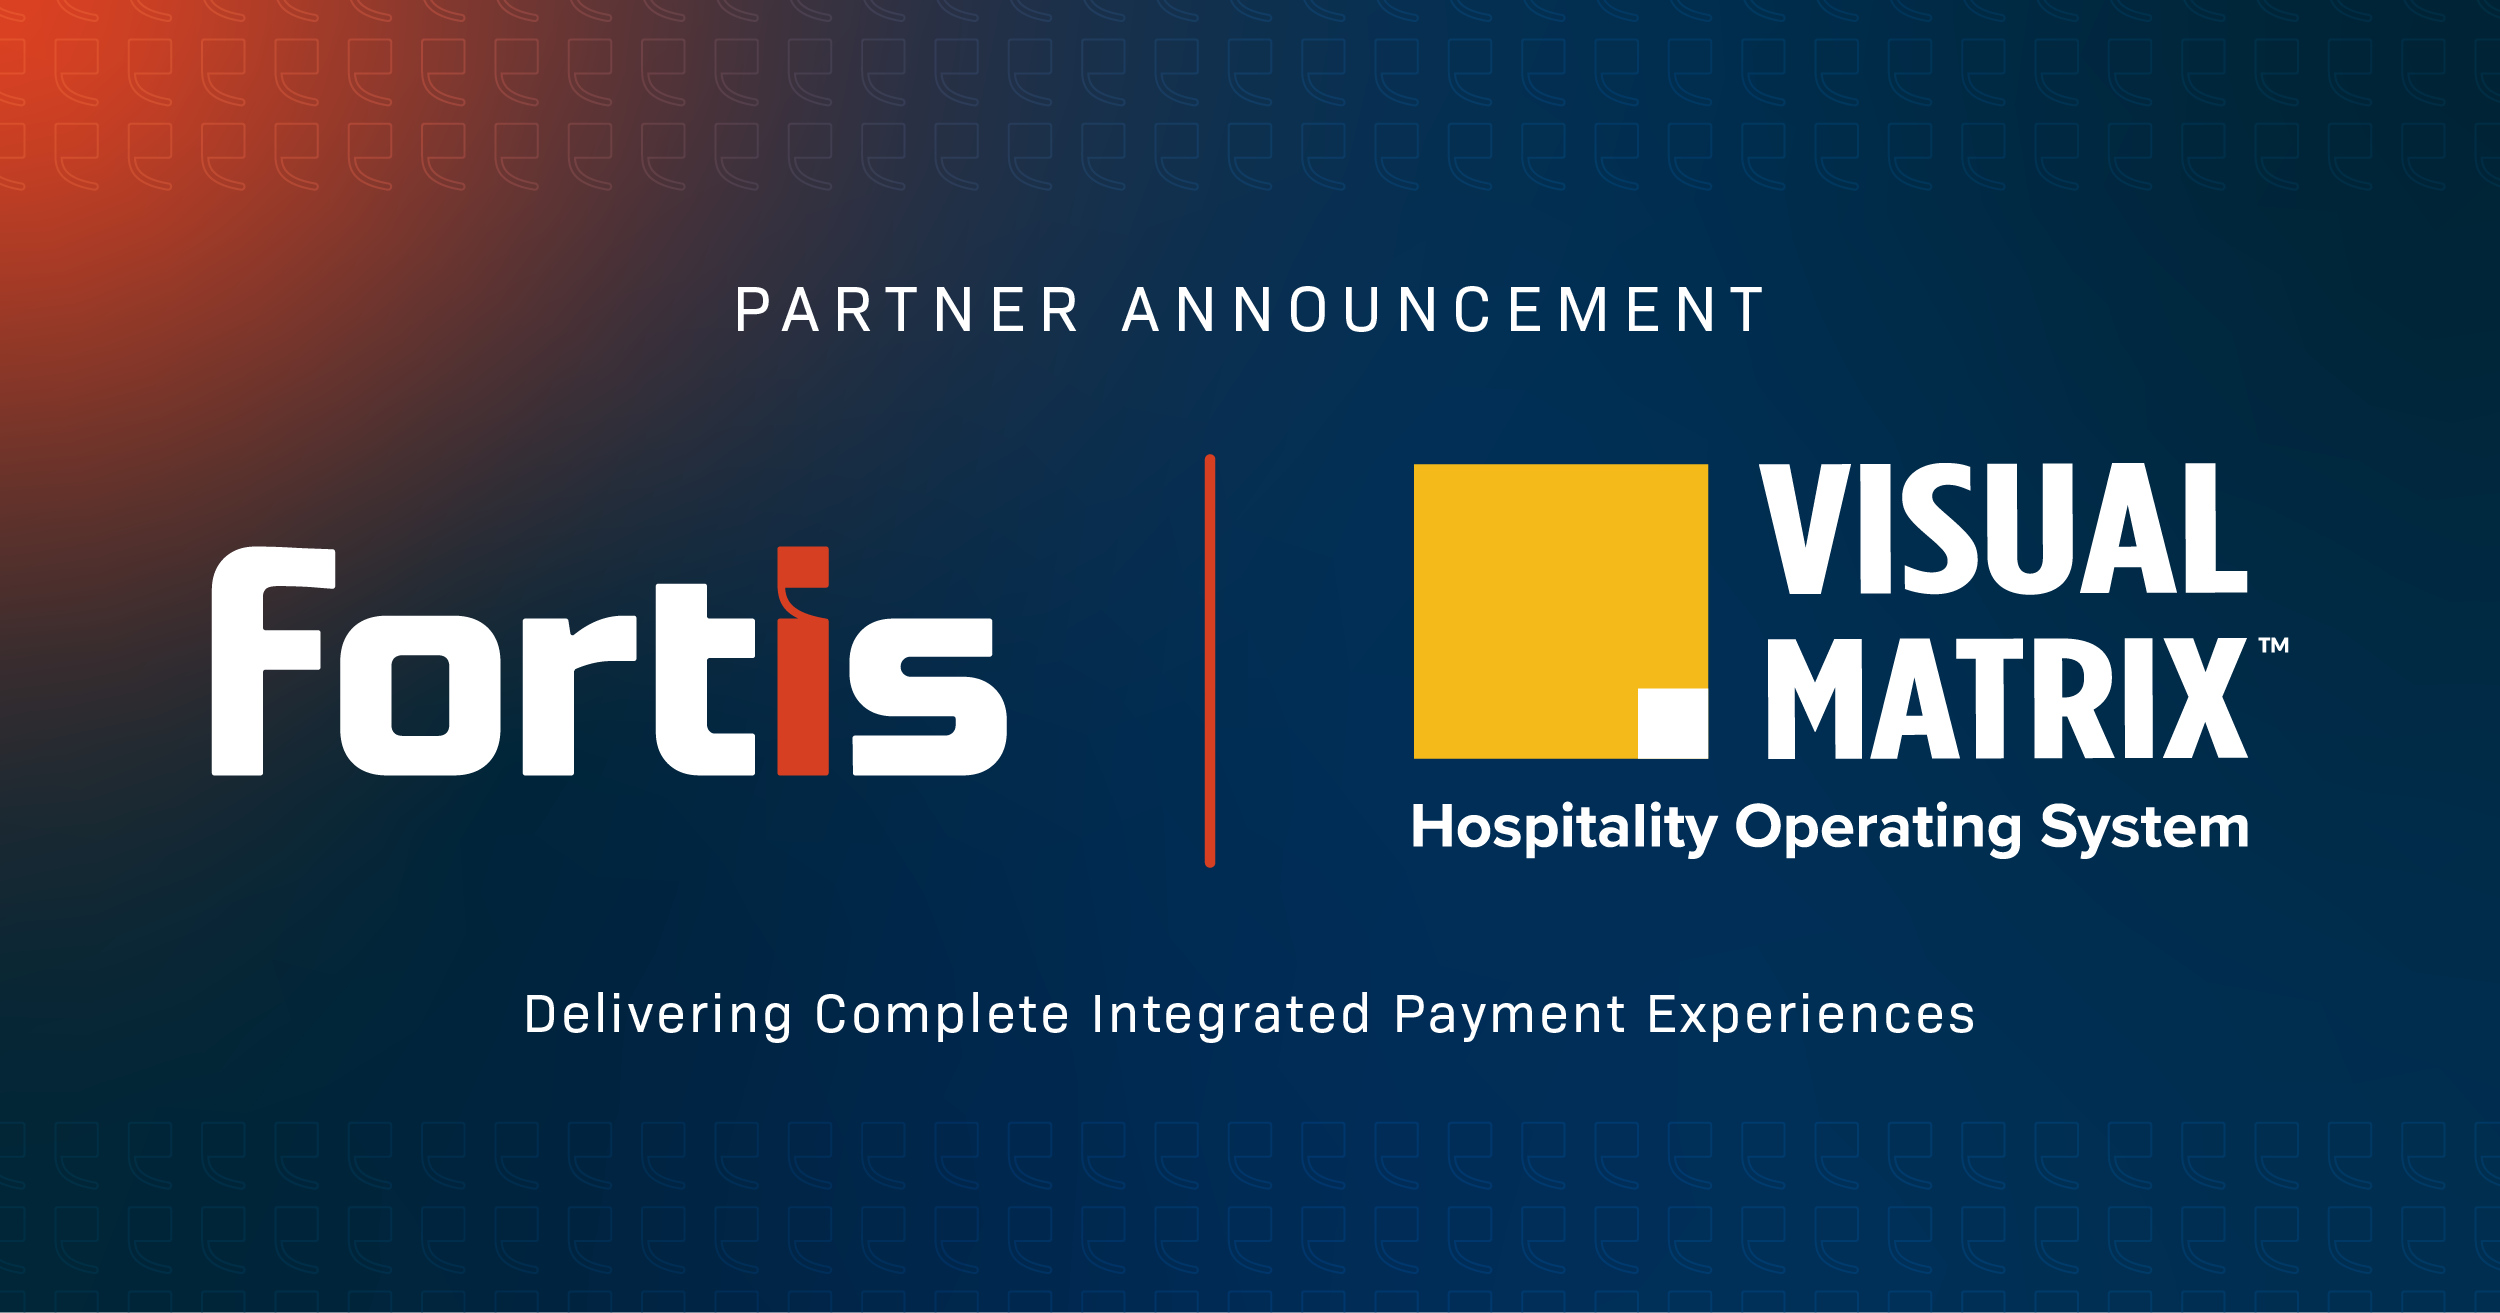 Fortis and Visual Matrix Team Up to Deliver a Comprehensive Integrated Payment Experience for Hospitality Operating Systems - Featured Image